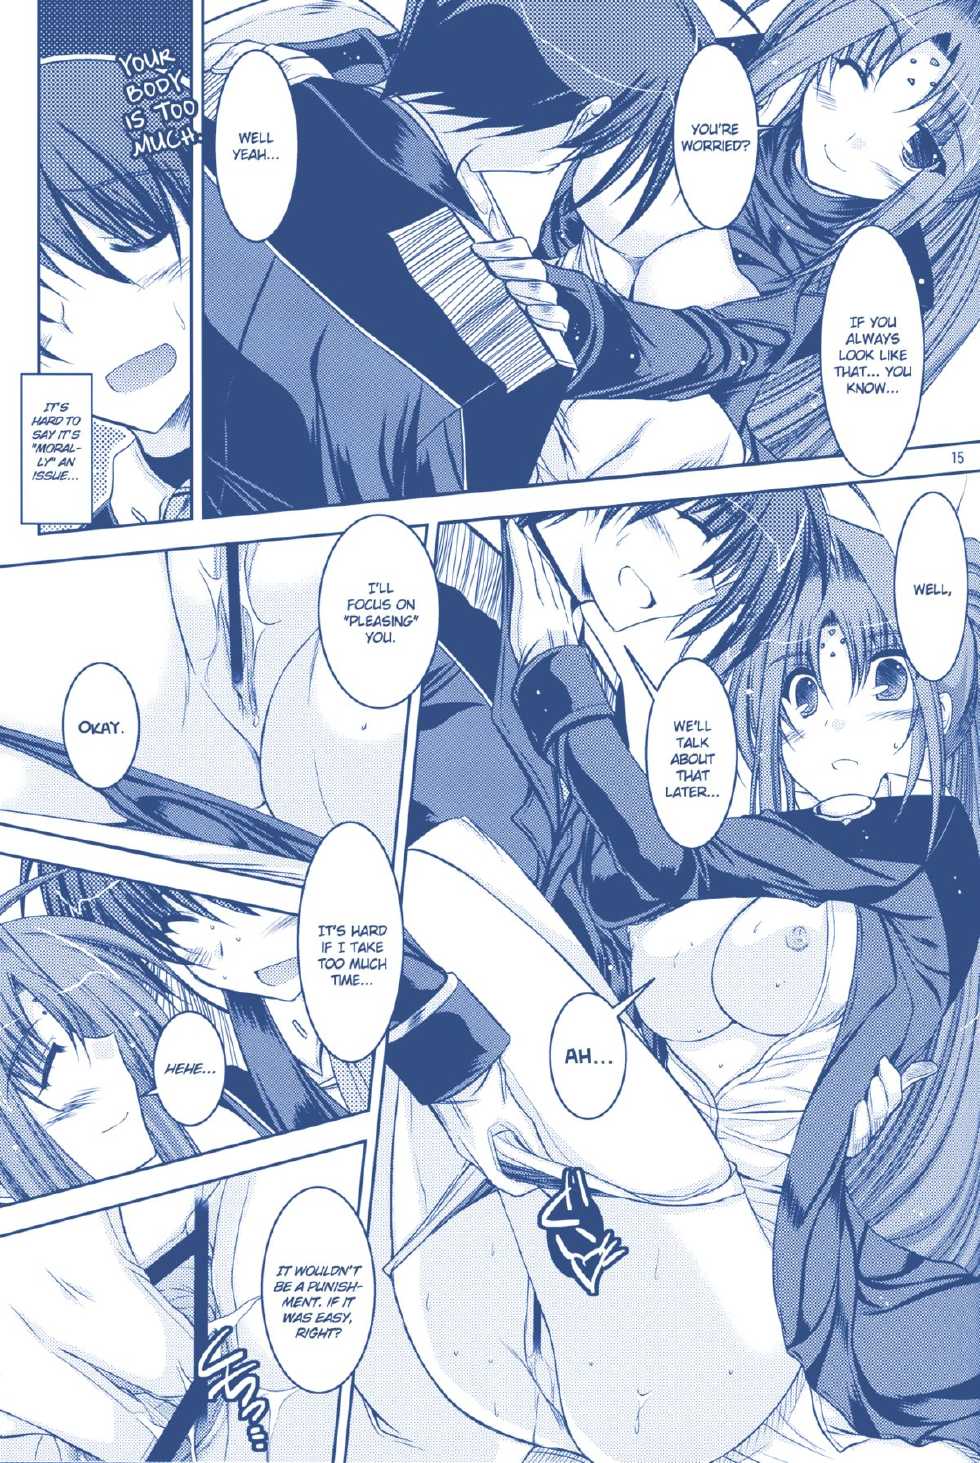 (C74) [ELHEART'S (Ibuki Pon)] ANOTHER FRONTIER 02 Magical Girl Lyrical Lindy-san #03 (Magical Girl Lyrical Nanoha StrikerS) [English] - Page 15